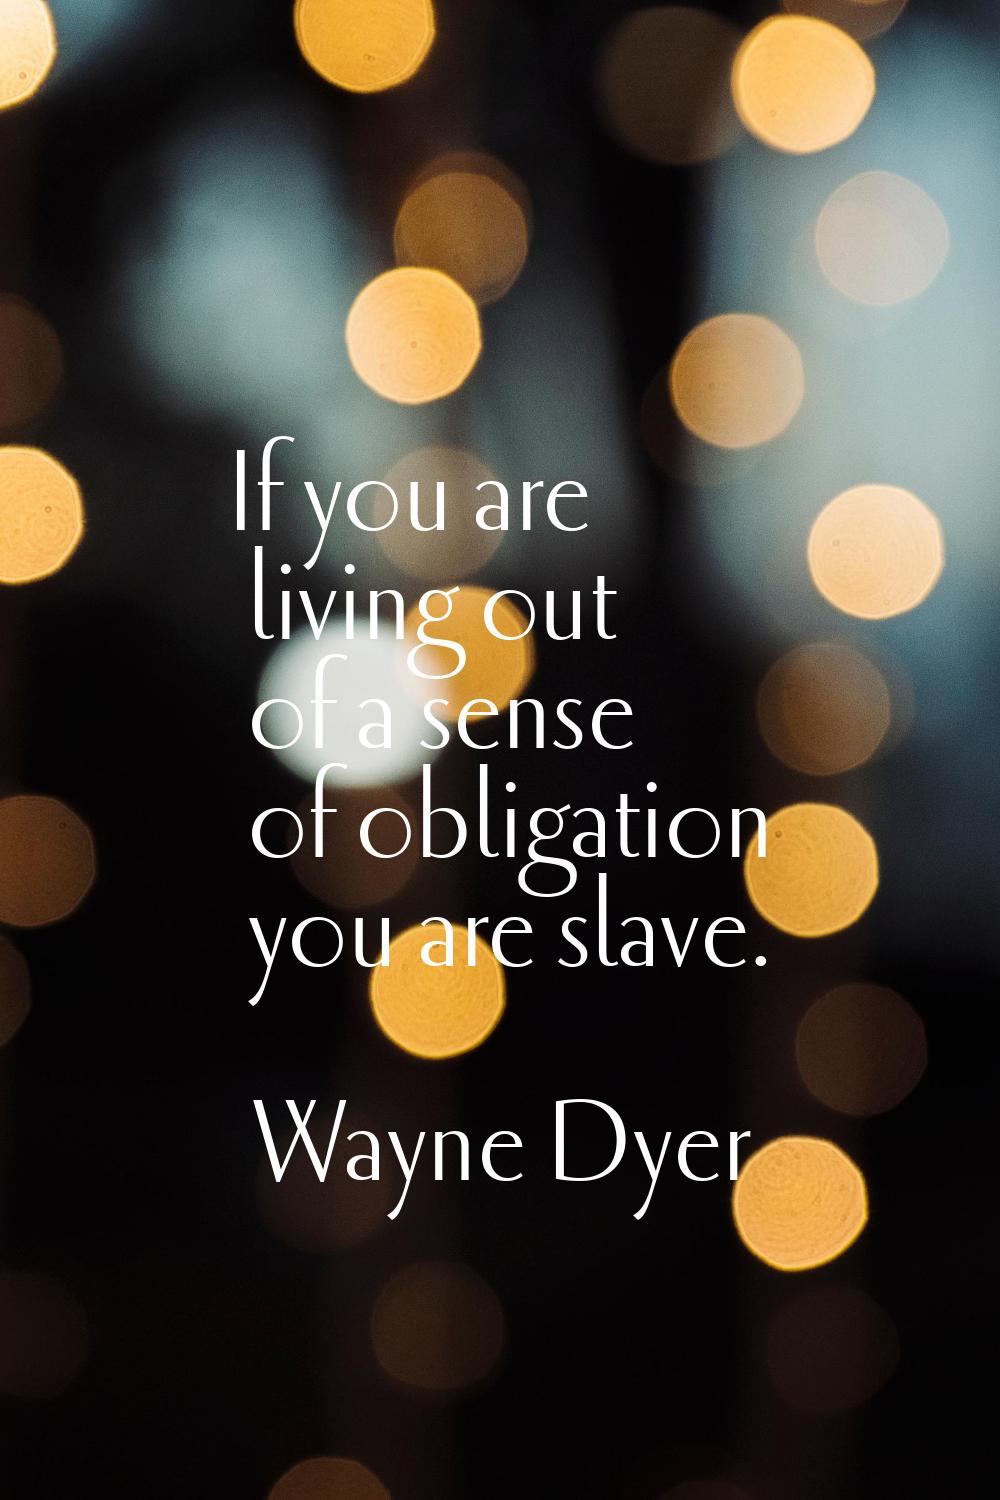 If you are living out of a sense of obligation you are slave.